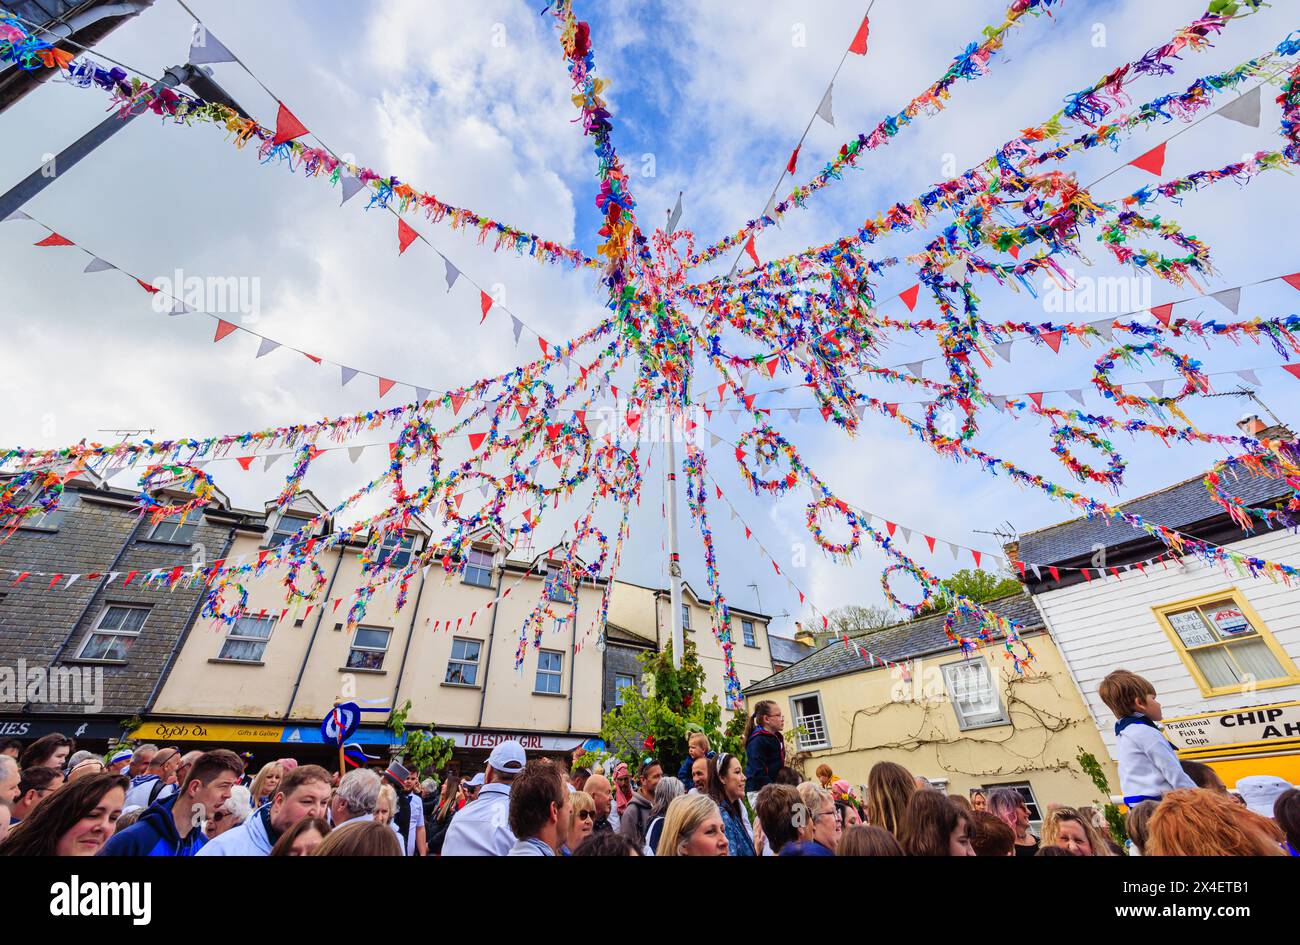 The 'Obby 'Oss festival maypole, a traditional annual folk festival taking place on 1st May in Padstow, a coastal town in North Cornwall, England Stock Photo